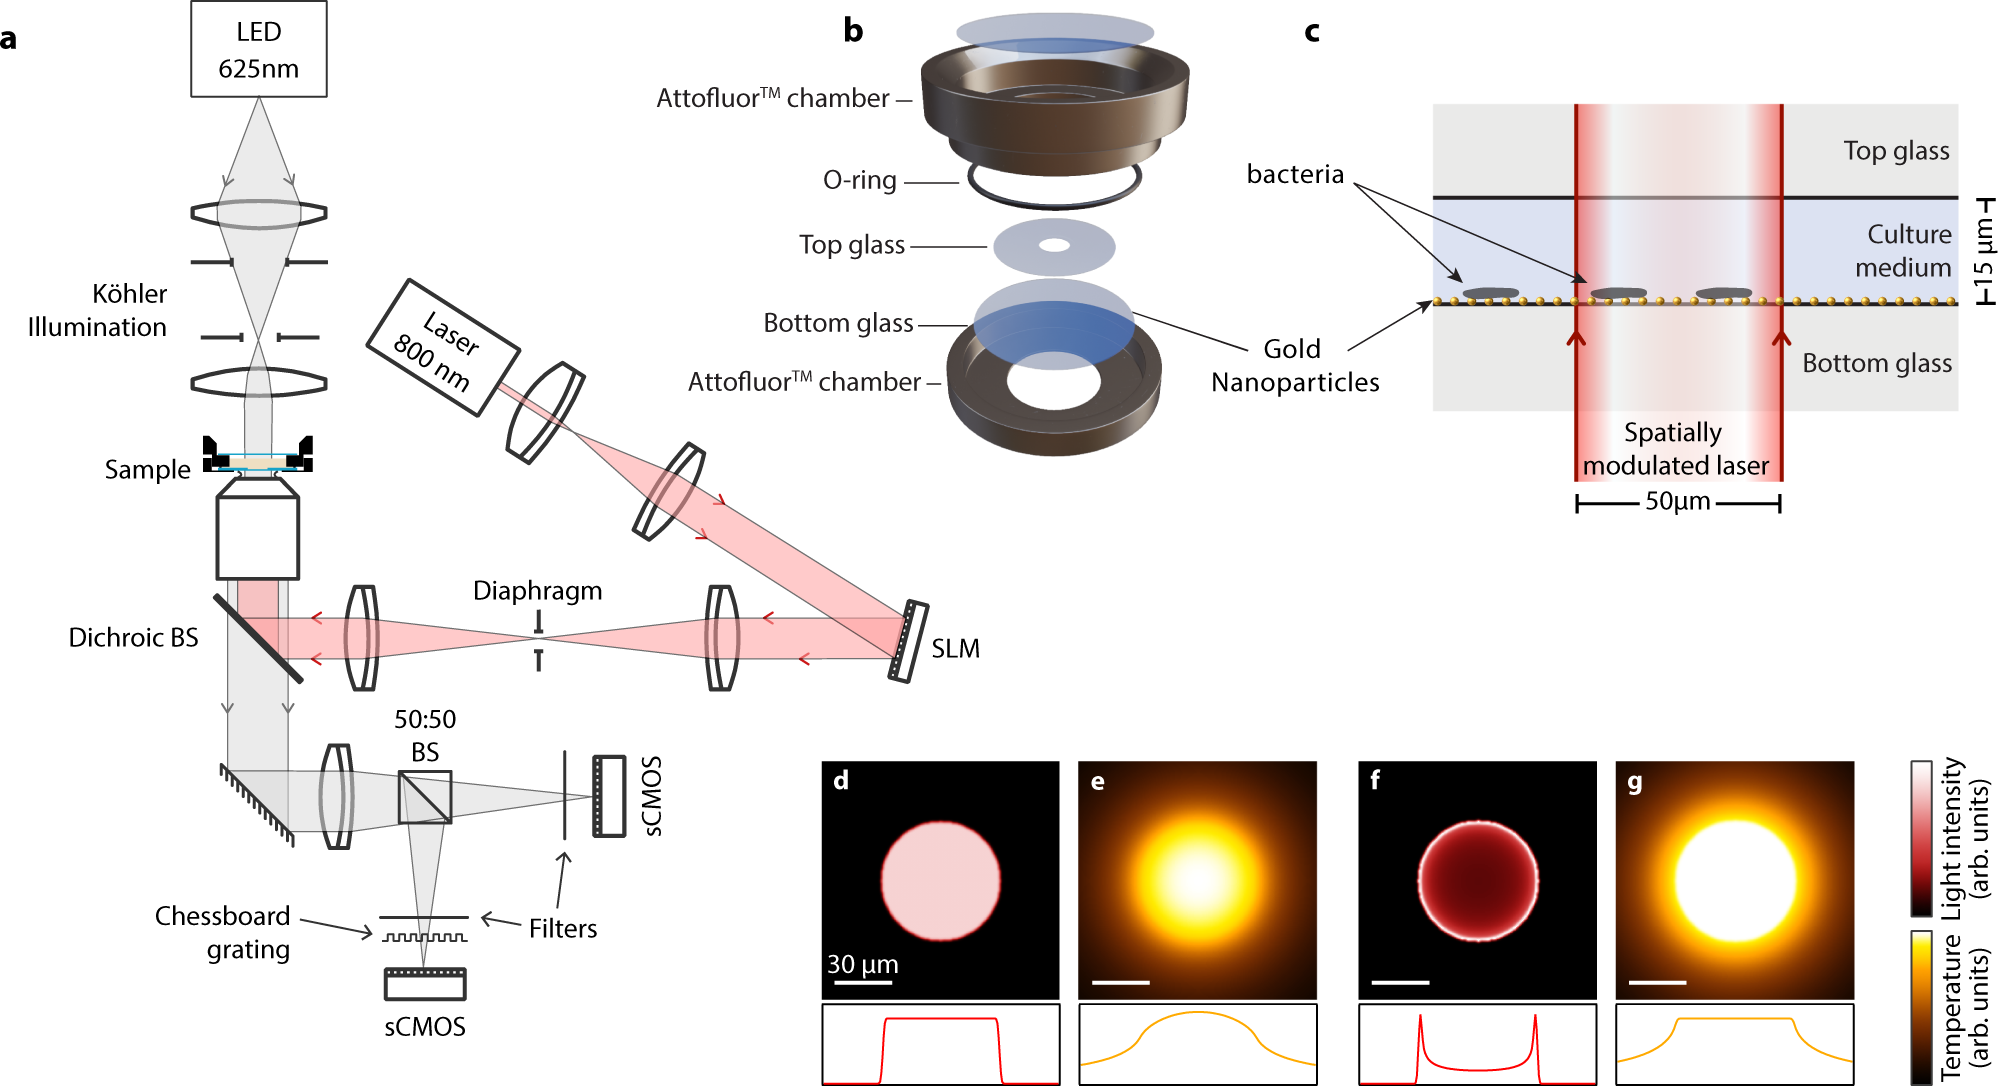 Life at high temperature observed in vitro upon laser heating of gold  nanoparticles | Nature Communications